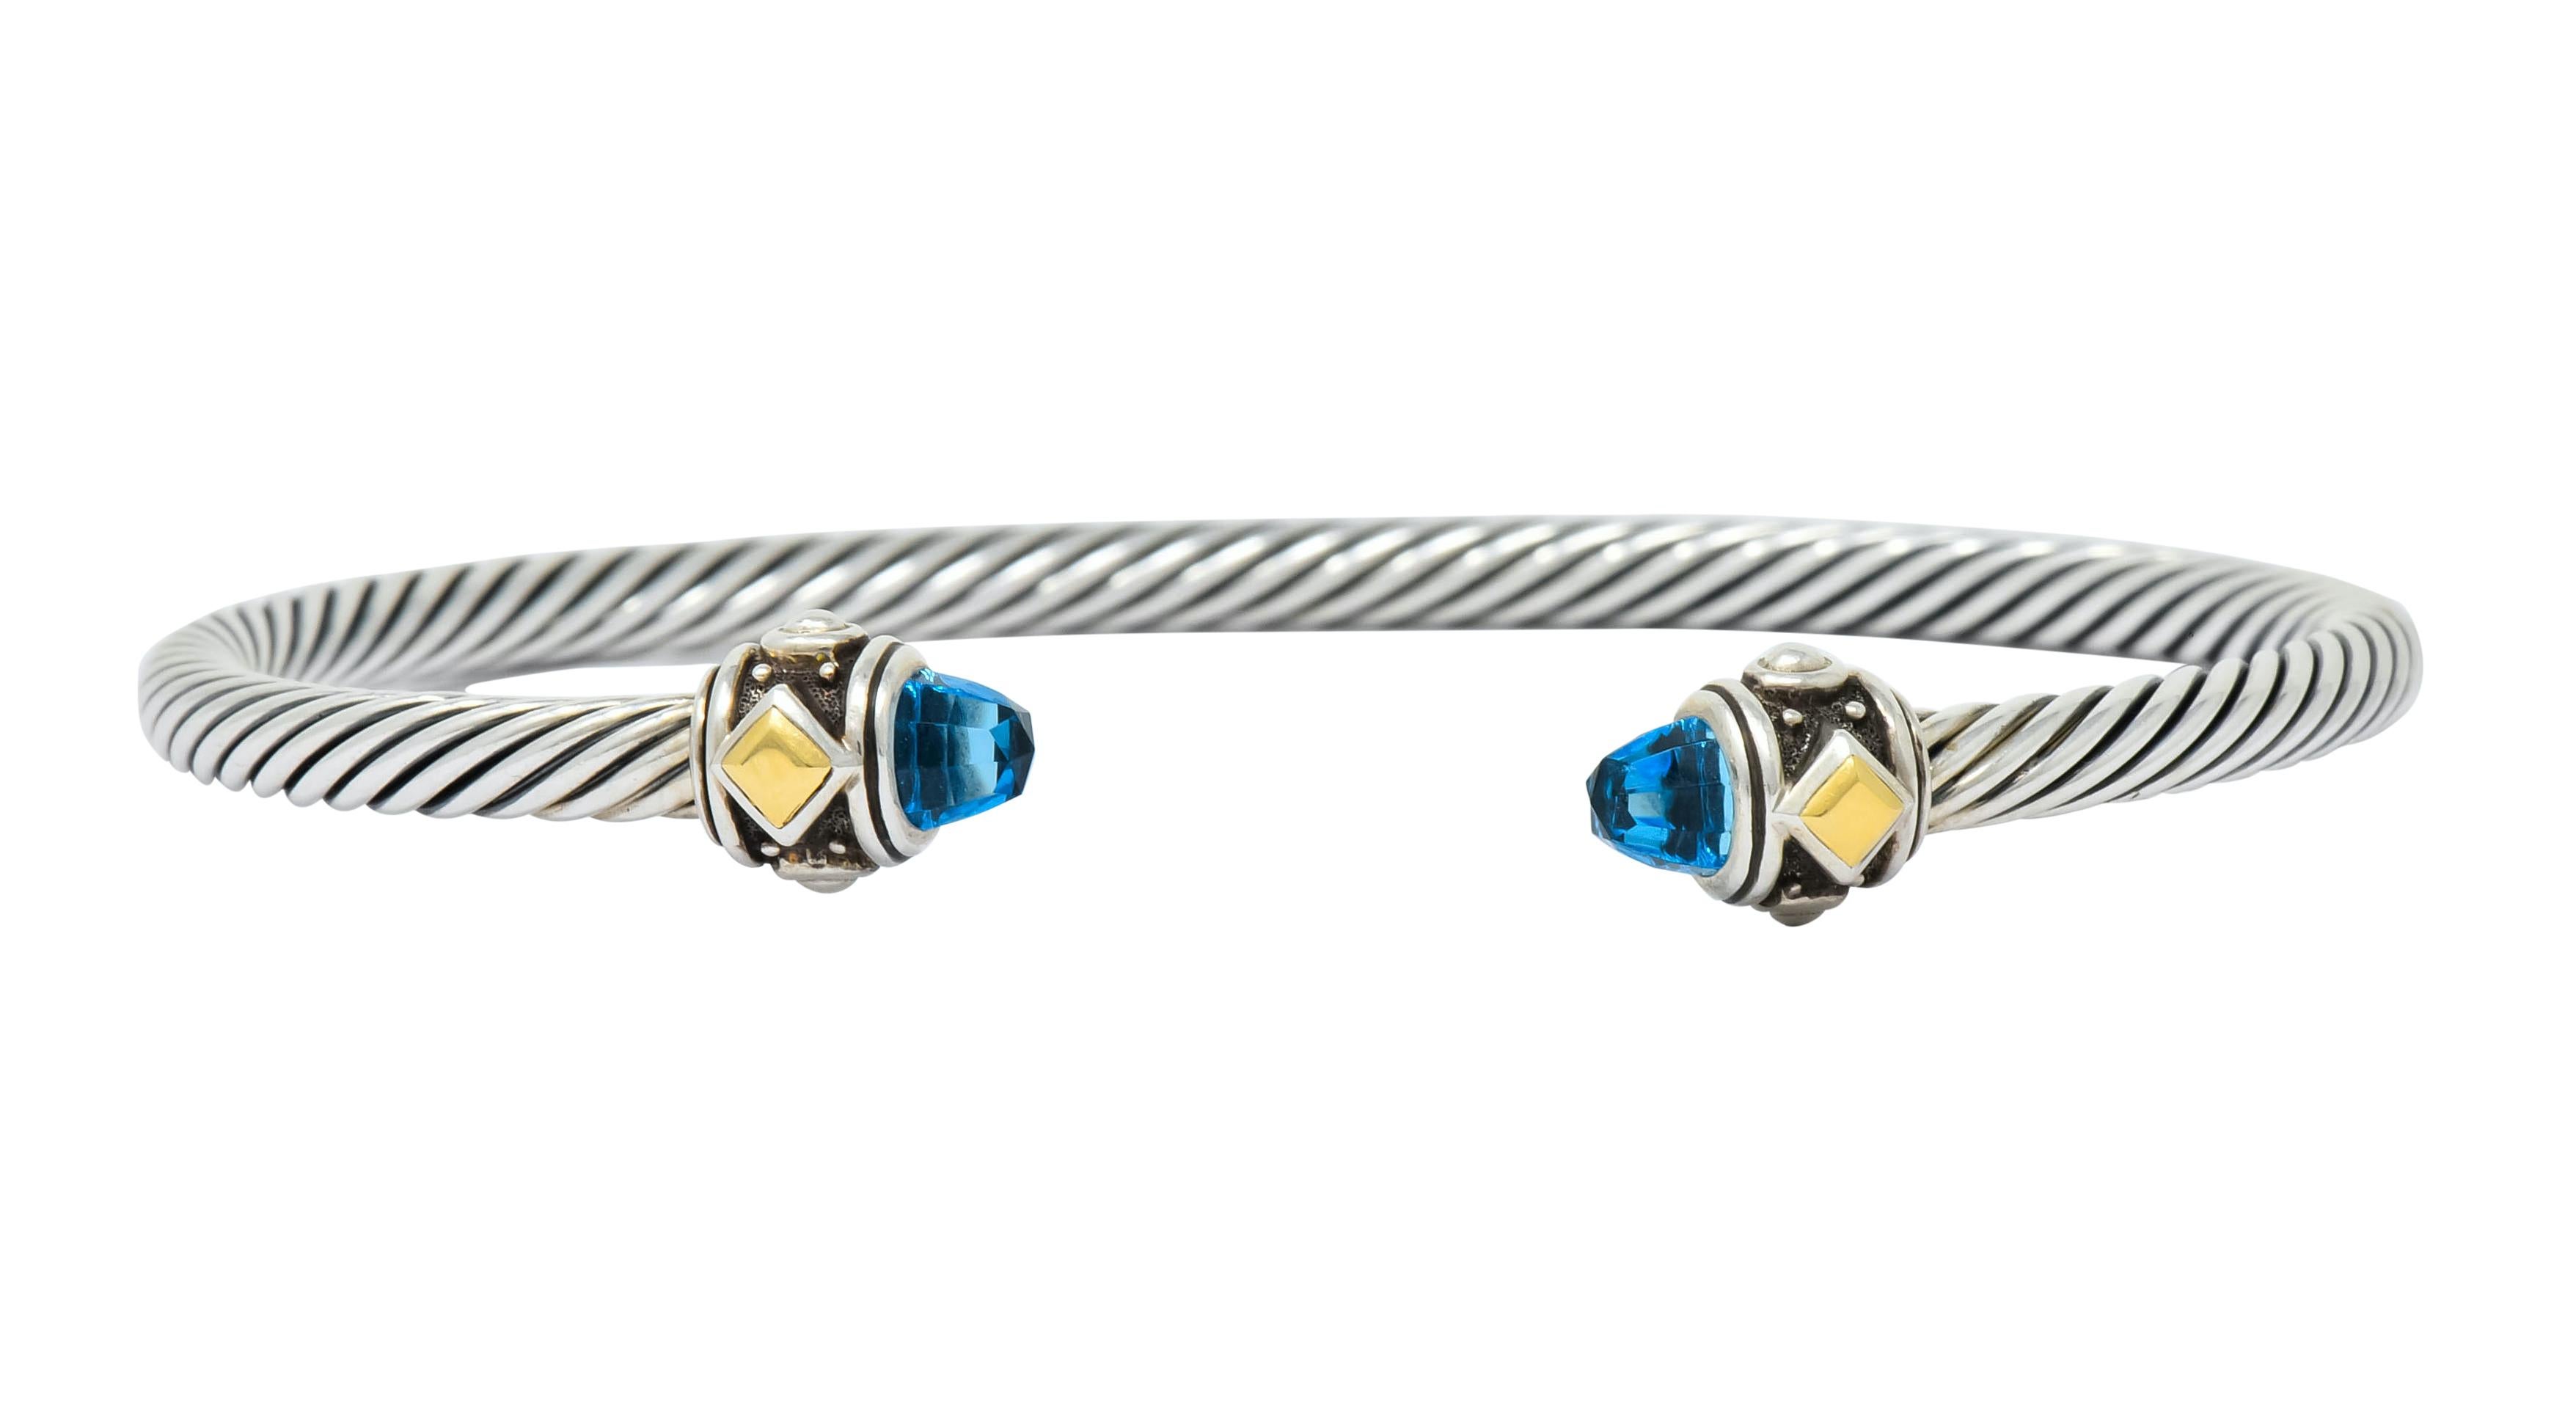 Cuff style bracelet comprised of sterling silver twisted cable motif

Terminating as two faceted blue topaz bullet cabochon, transparent and brilliantly sky blue in color

Bezel set in silver terminals featuring a recessed channel accented by gold